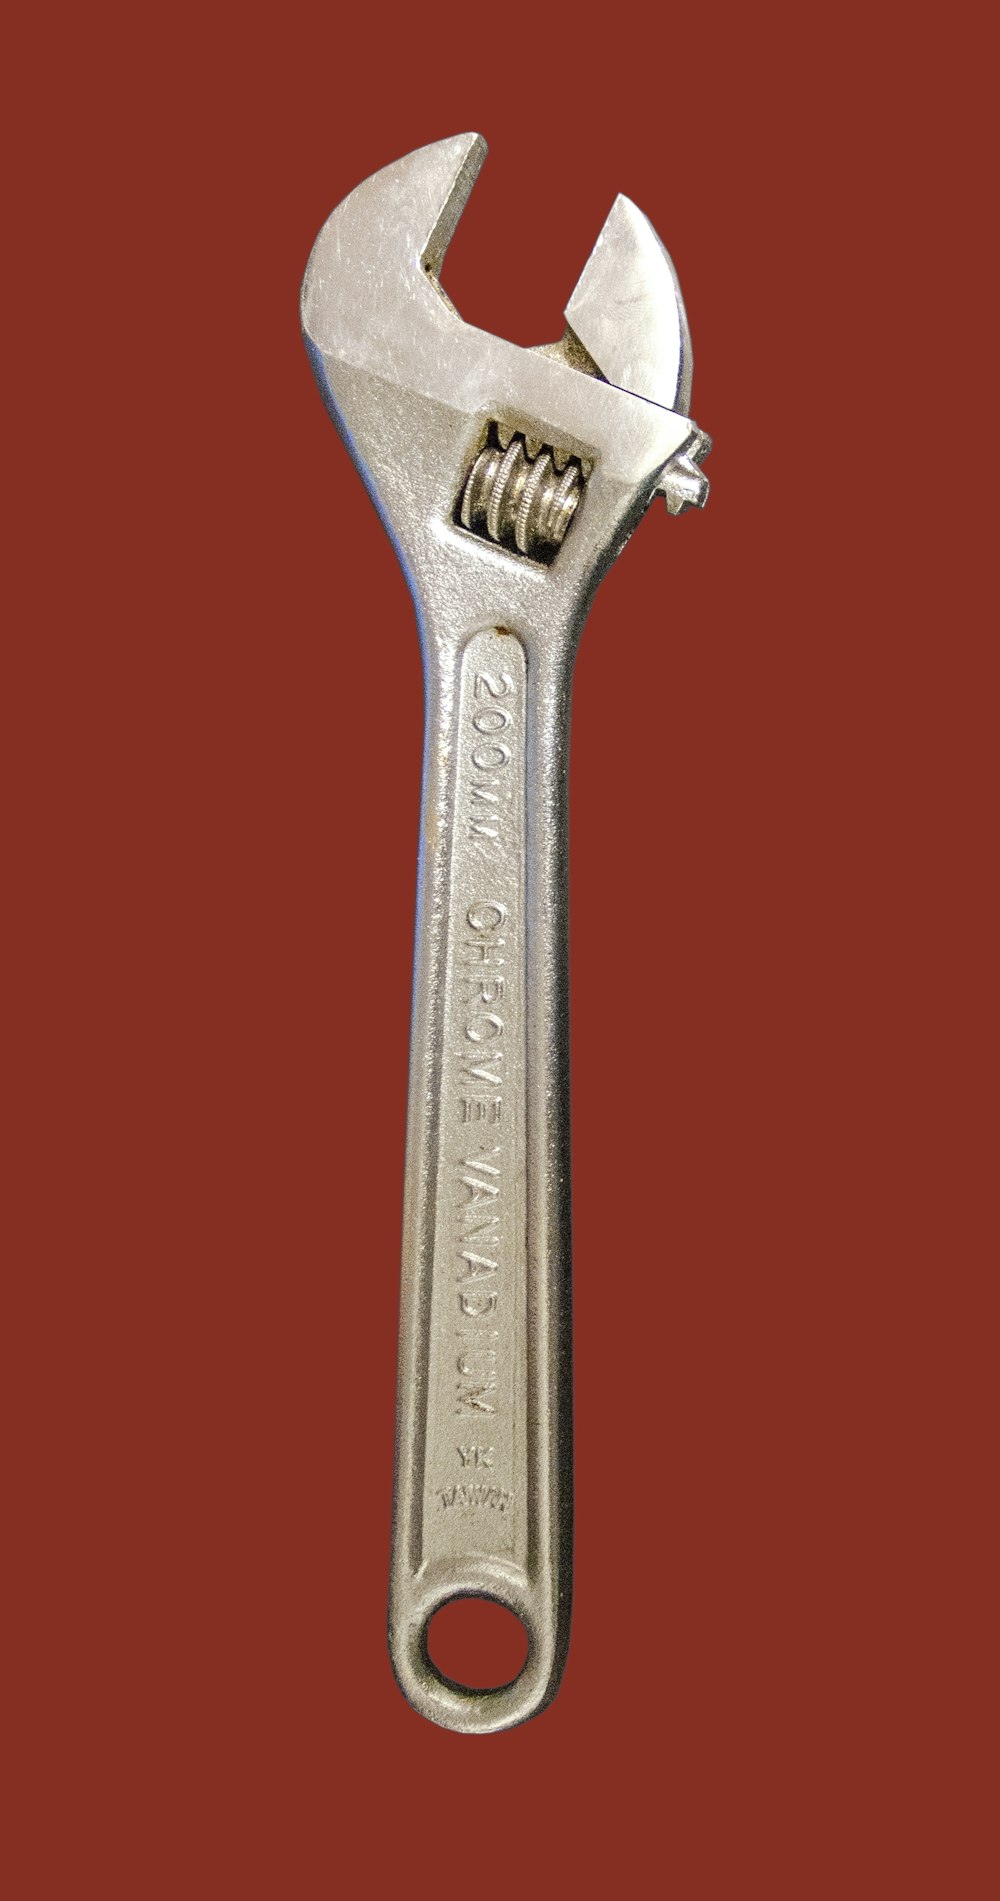 a wrench on a red background with a red background